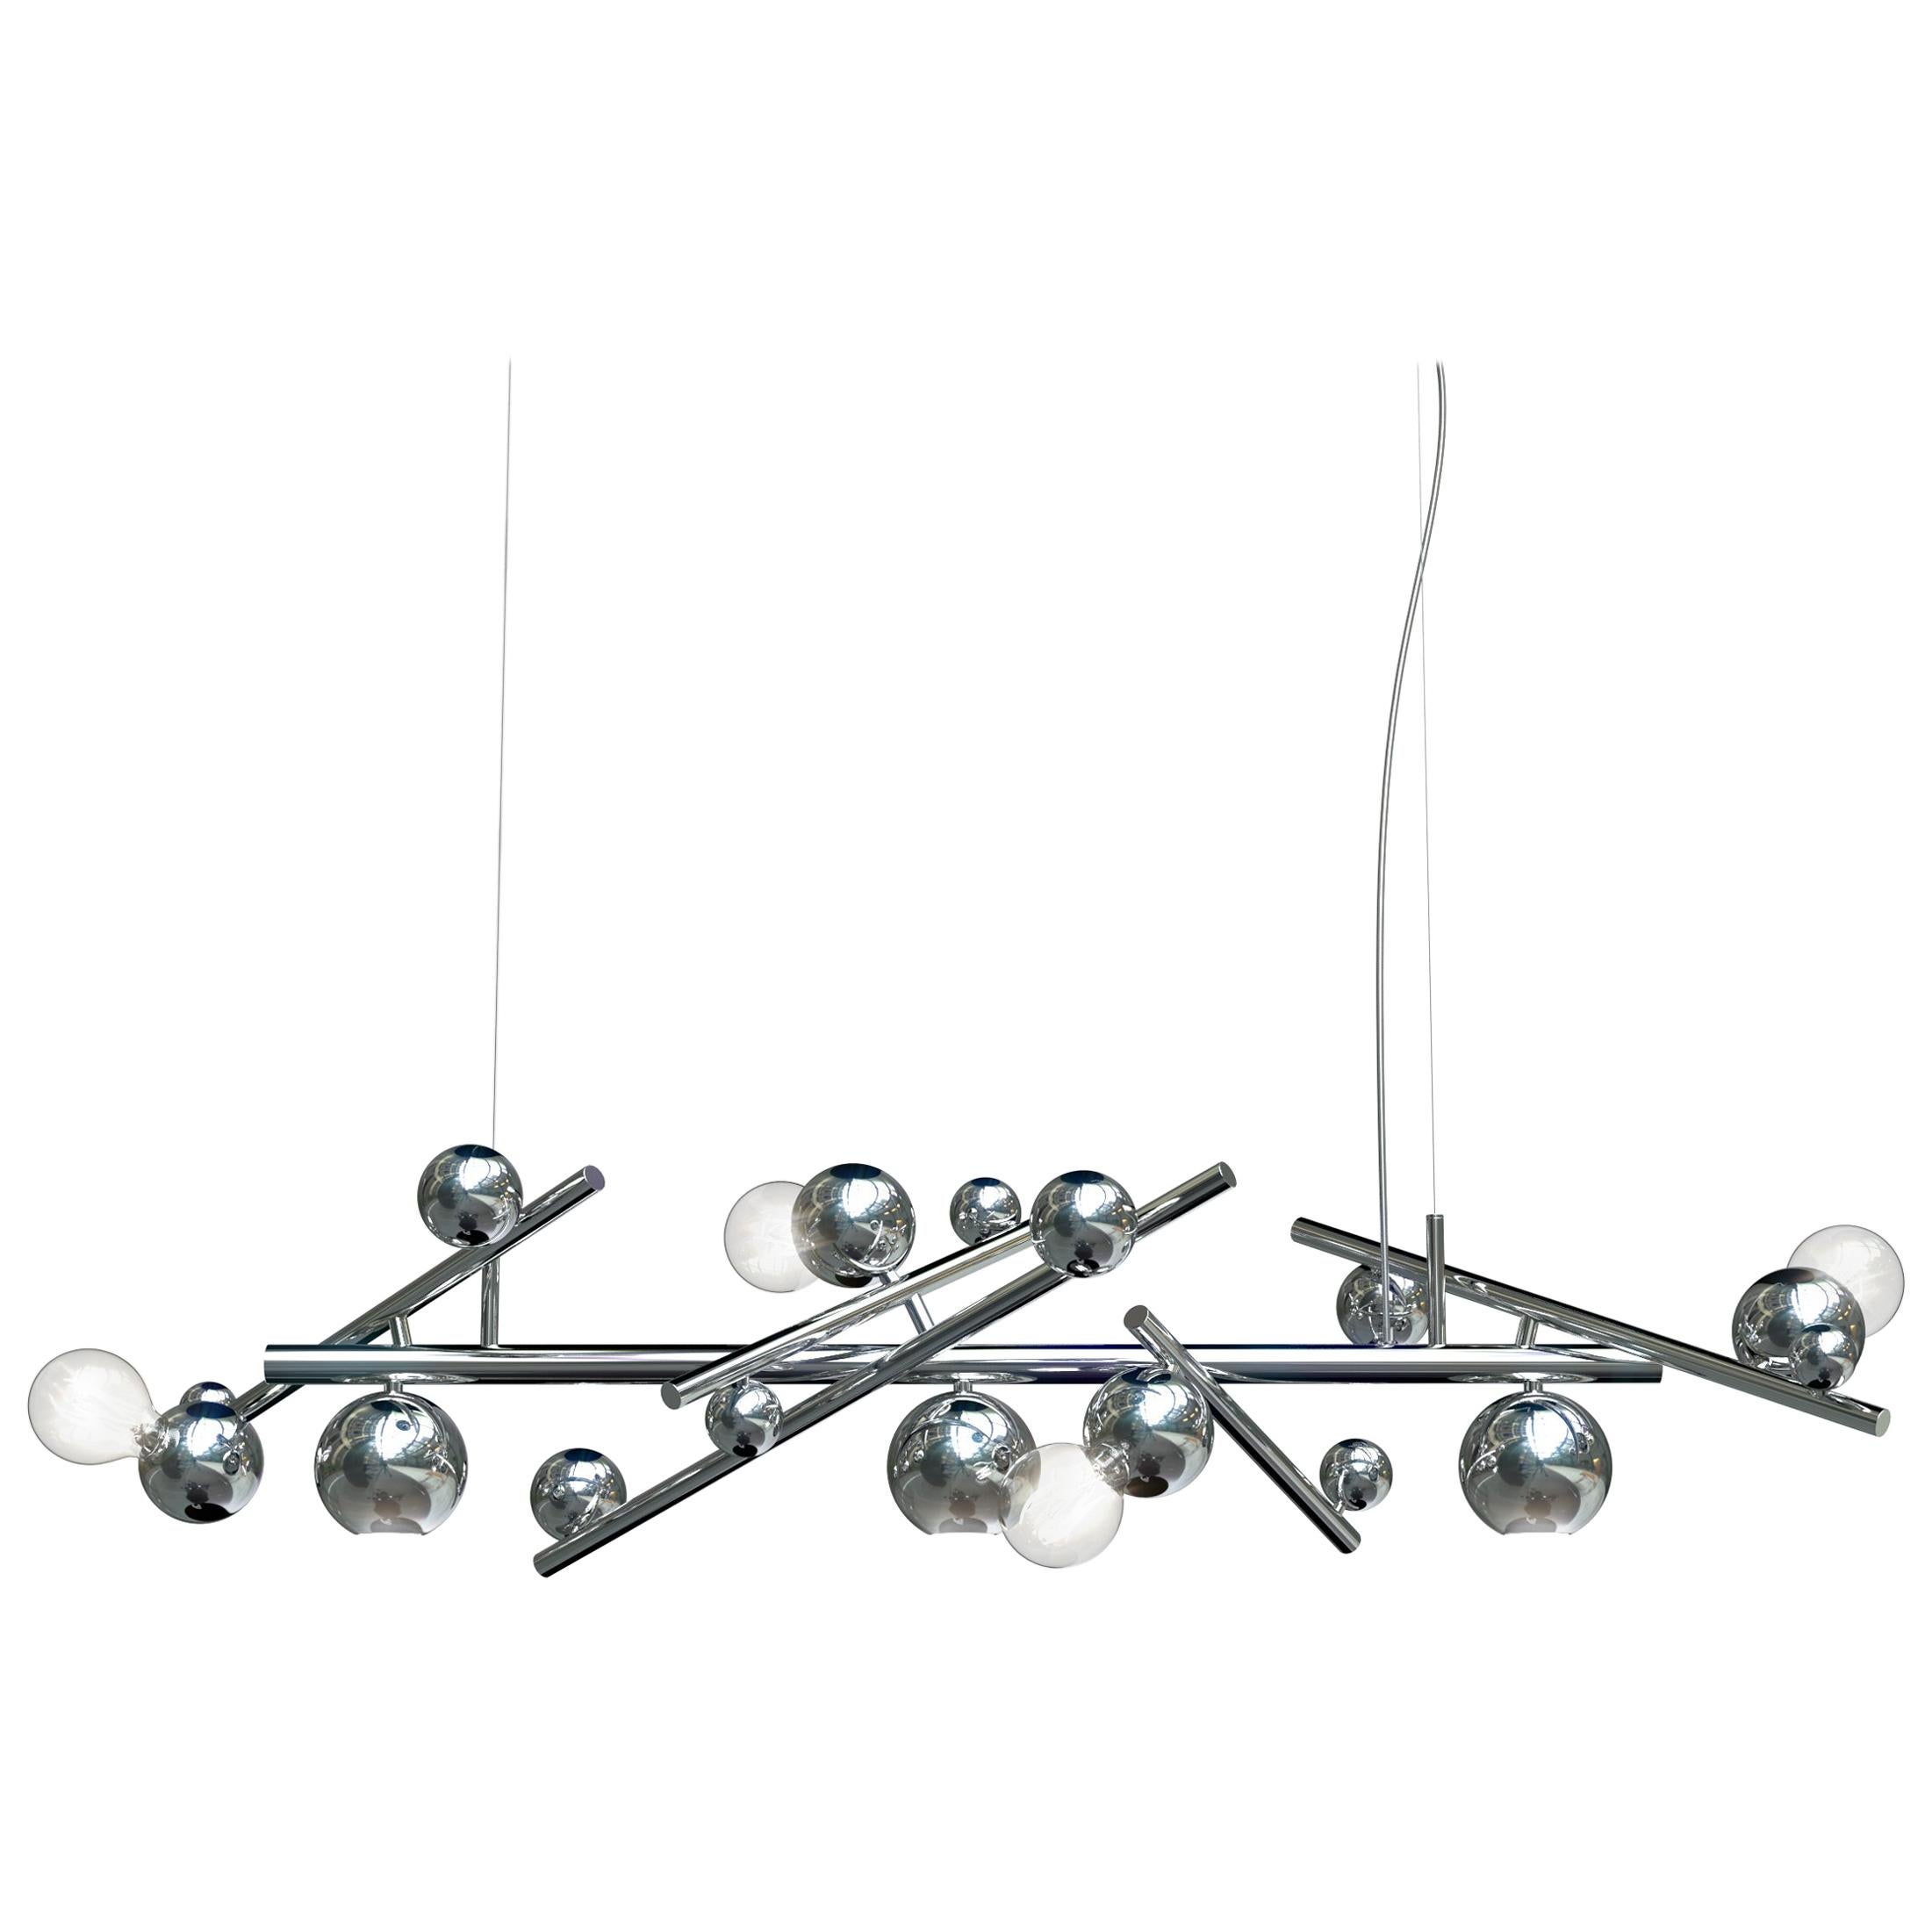 Modern Pendant in a Nickel Finish, Galaxy Collection, by Brand van Egmond  